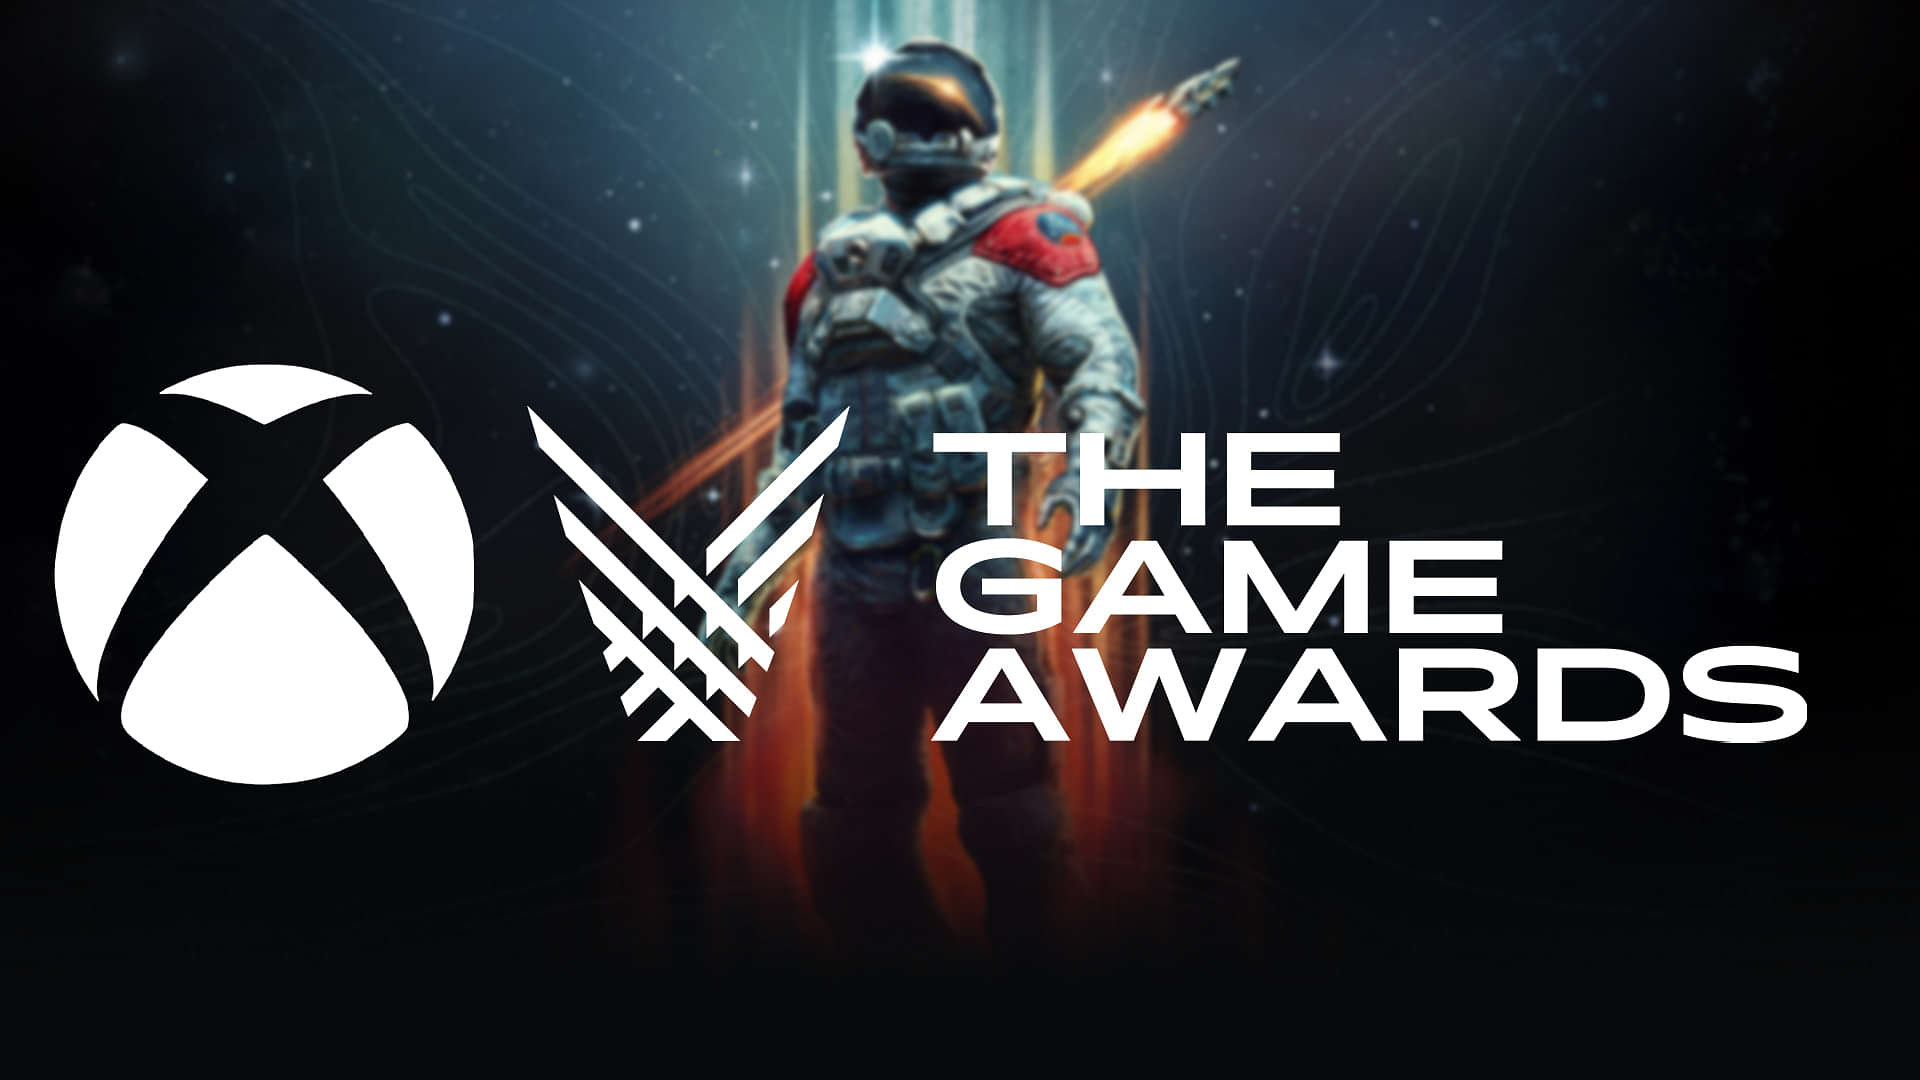 Xbox Celebrates The Game Awards with the First Gameplay Reveal of